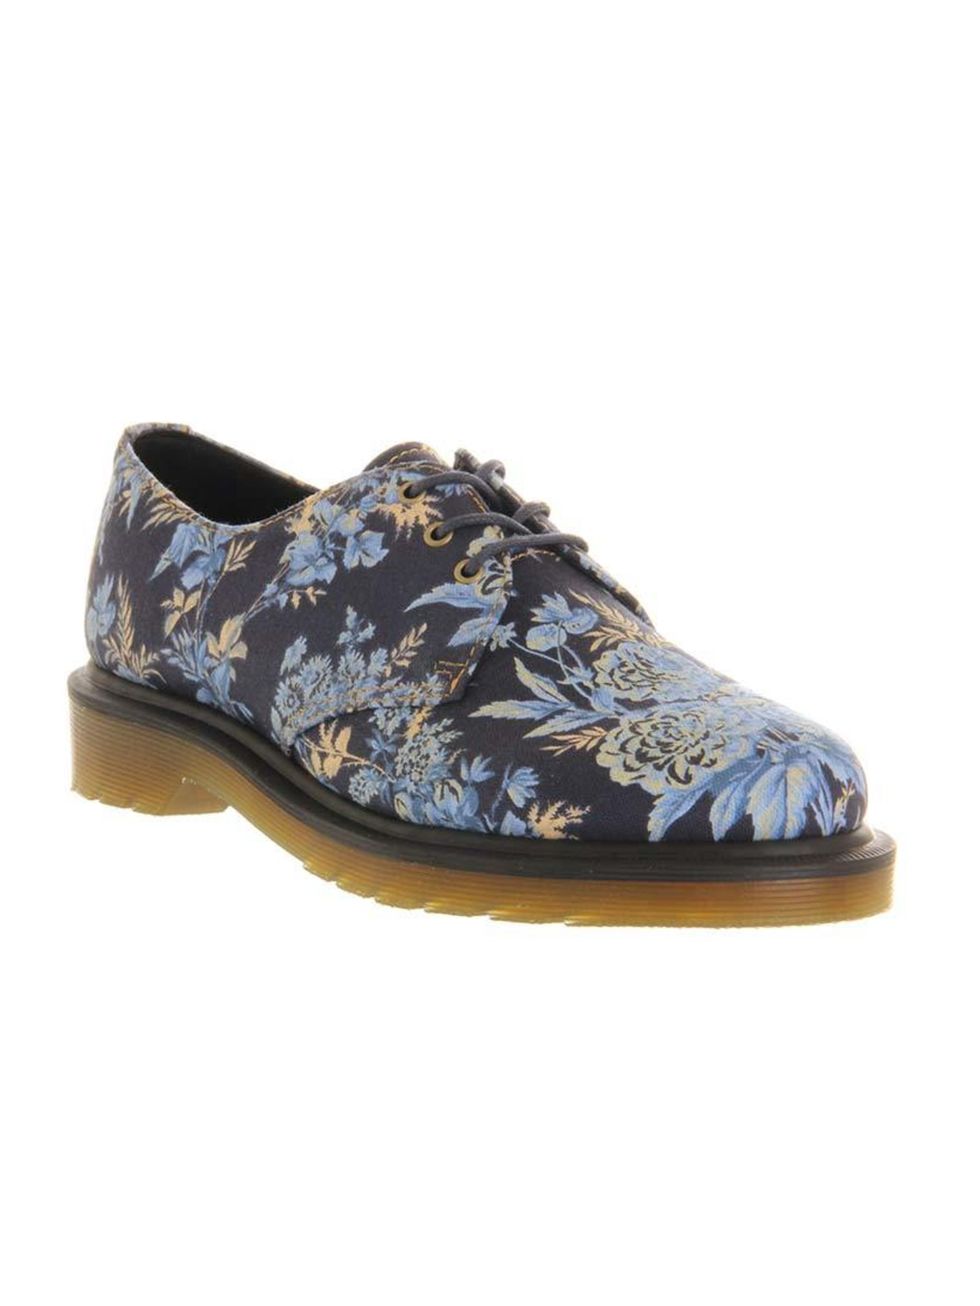 <p>Dr. Martens canvas shoes, £40 at <a href="http://www.office.co.uk/view/product/office_catalog/2,30/2708232850" target="_blank">Office</a>.</p>